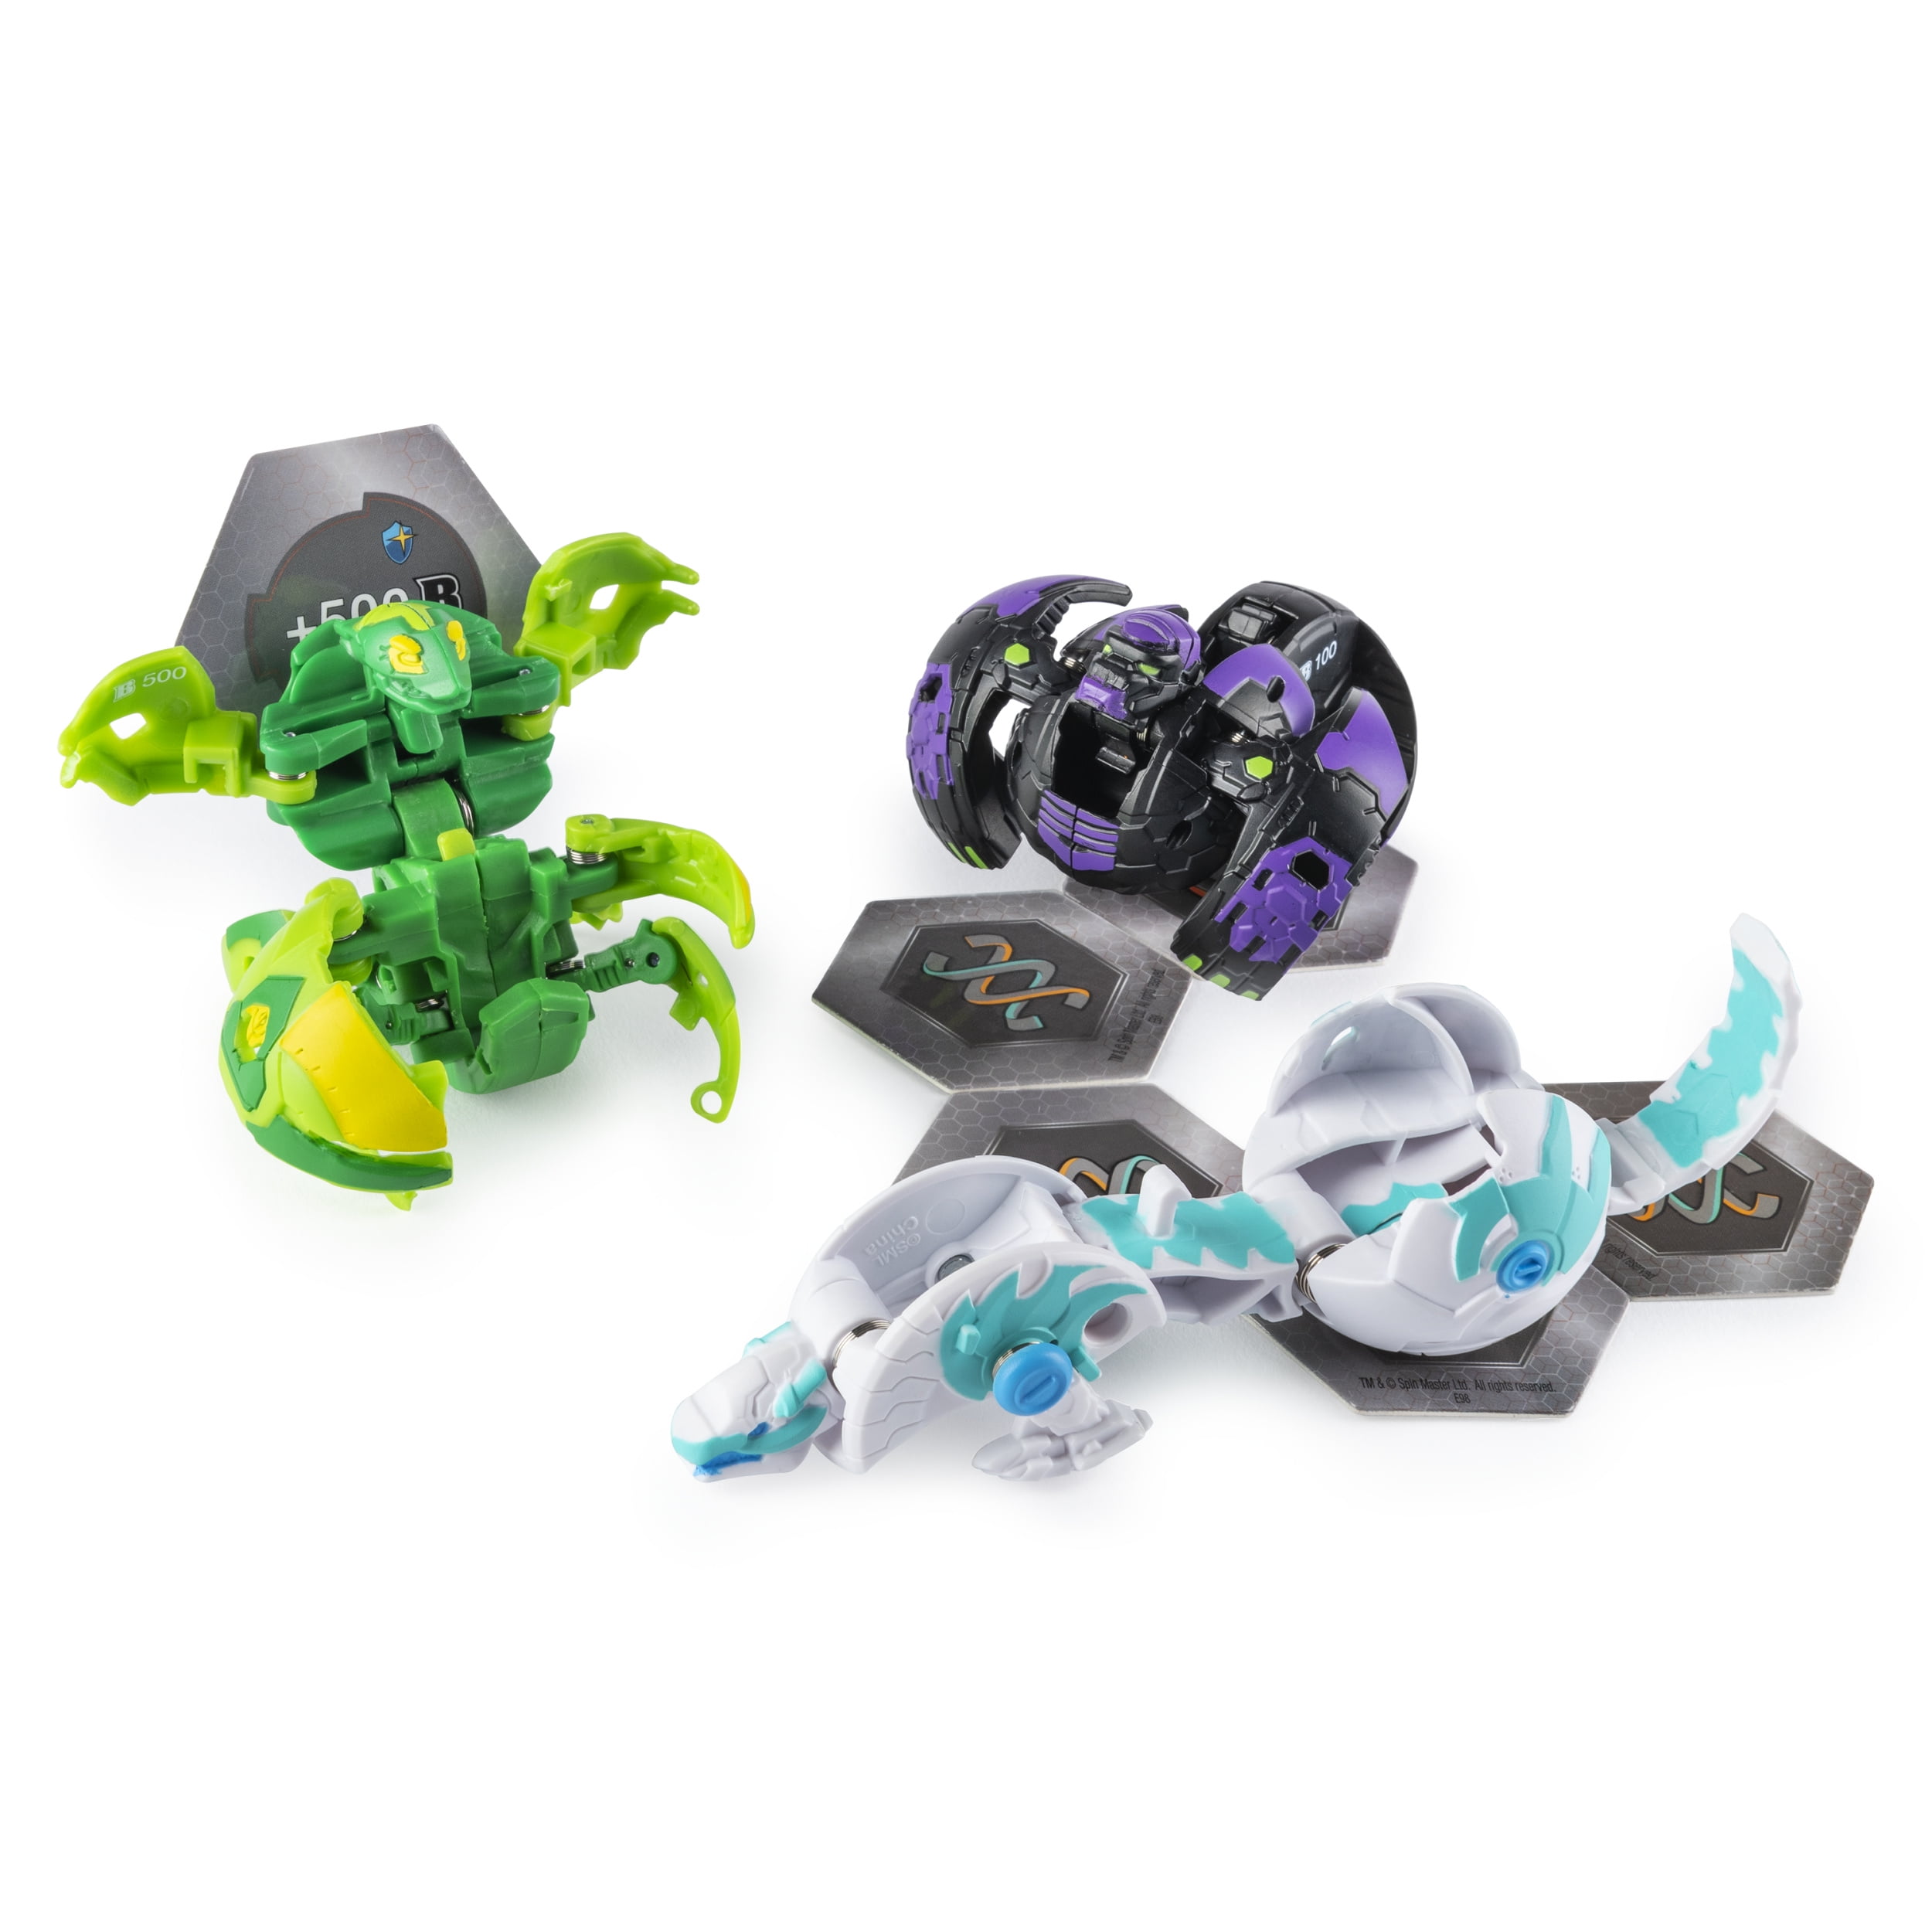 Bakugan Starter Pack 3-Pack, Ventus Vicerox, Collectible Action Figures,  for Ages 6 and Up